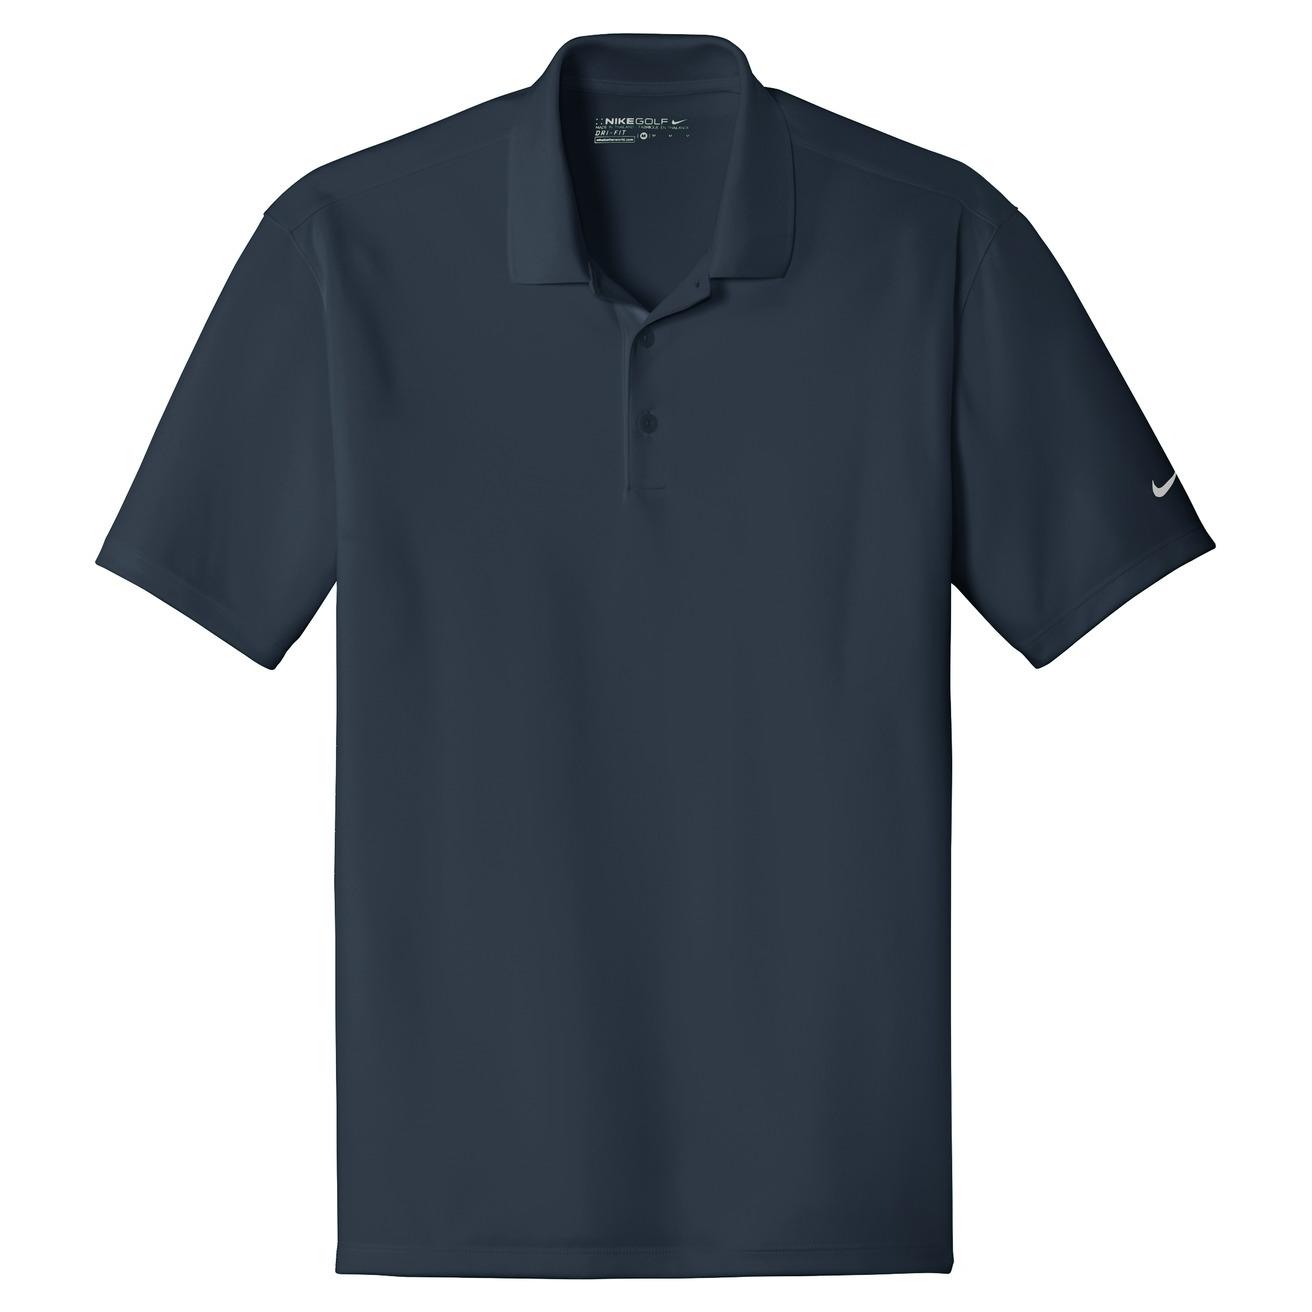 Nike 838956 Dri-FIT Players Polo with Flat Knit Collar - Navy | Full Source